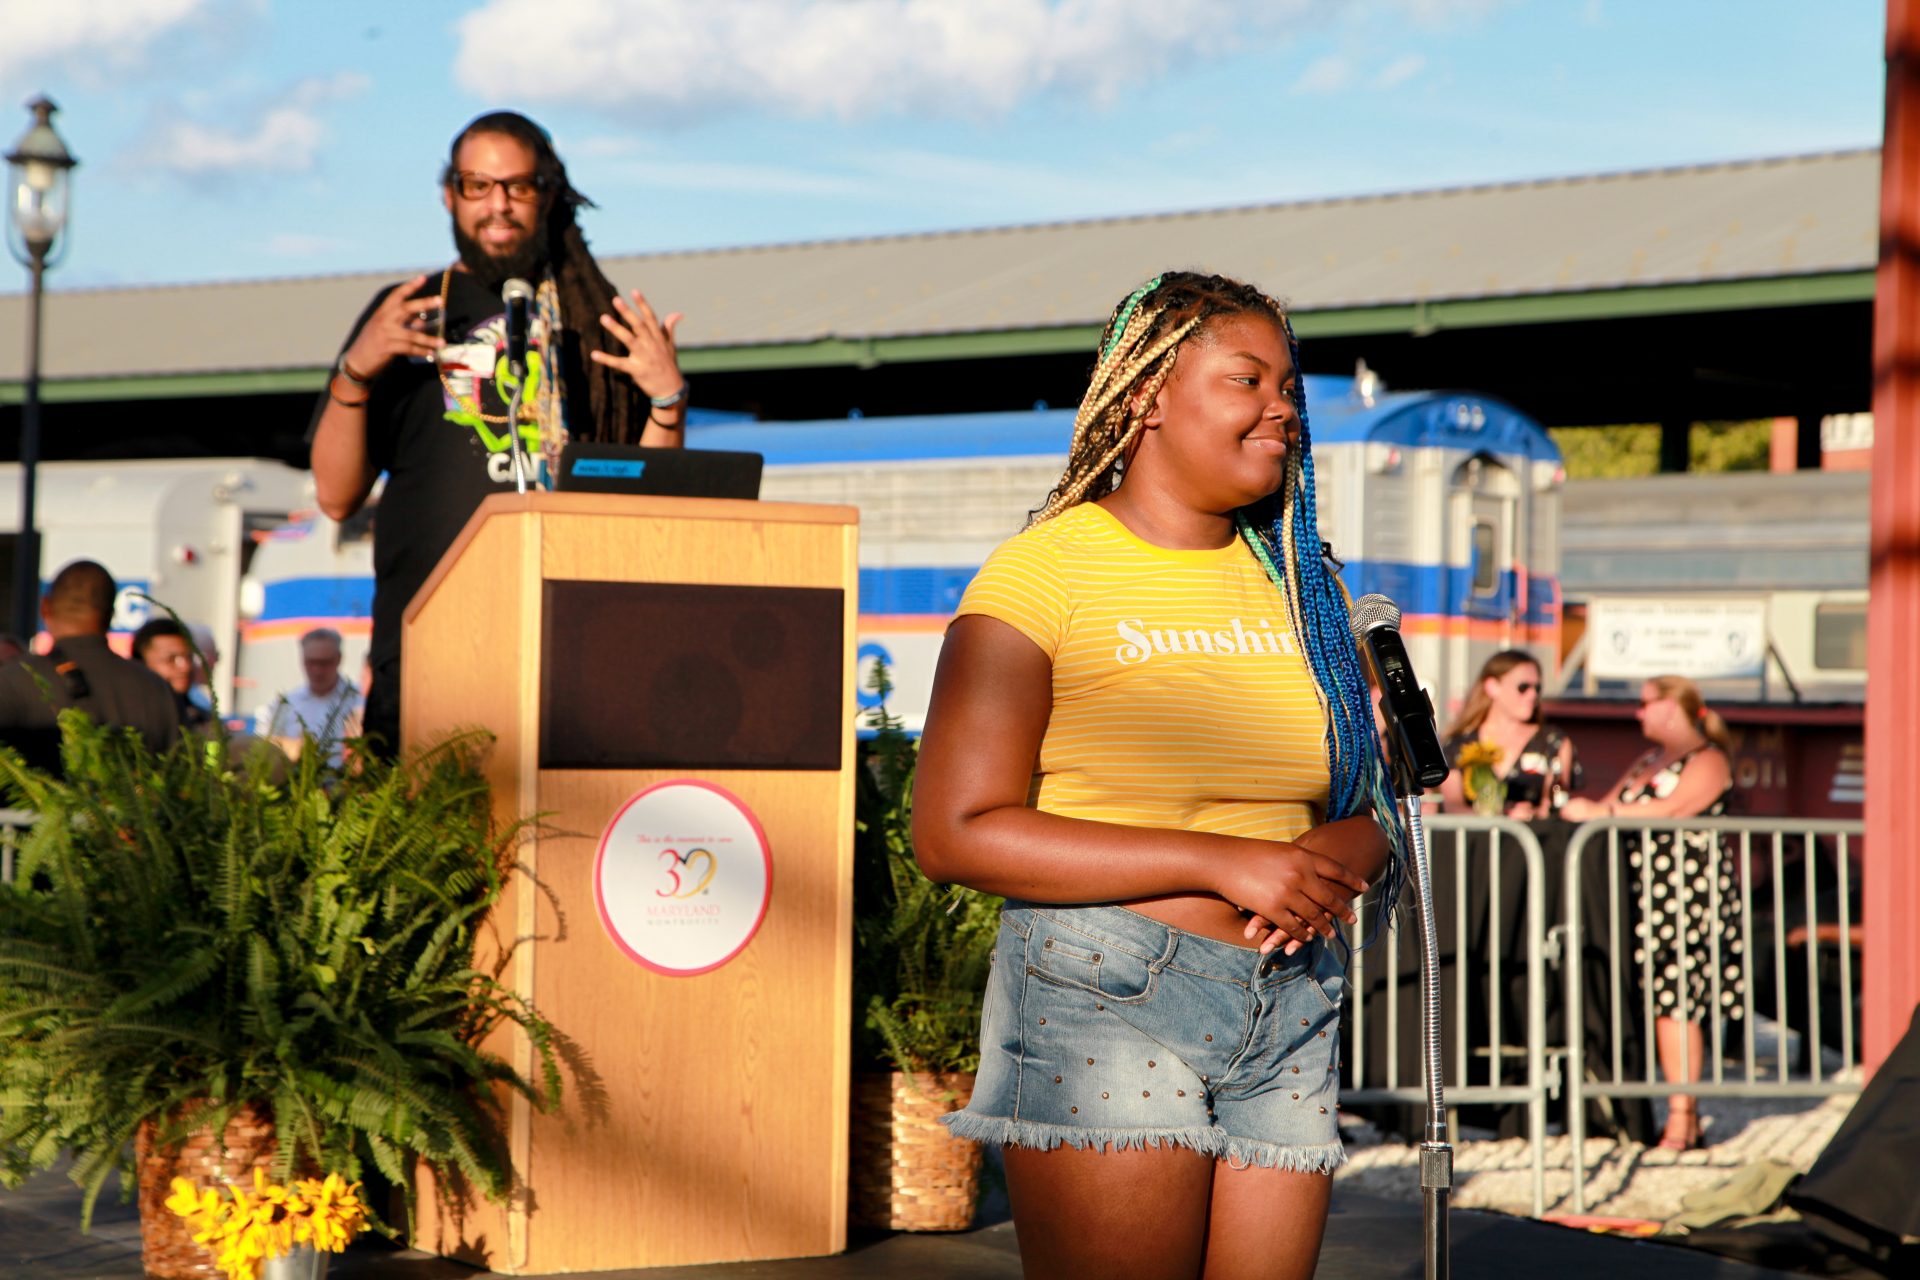 A young Black woman wearing a yellow shirt and denim shorts stands in front of a podum, smiling, ready to recite a poem